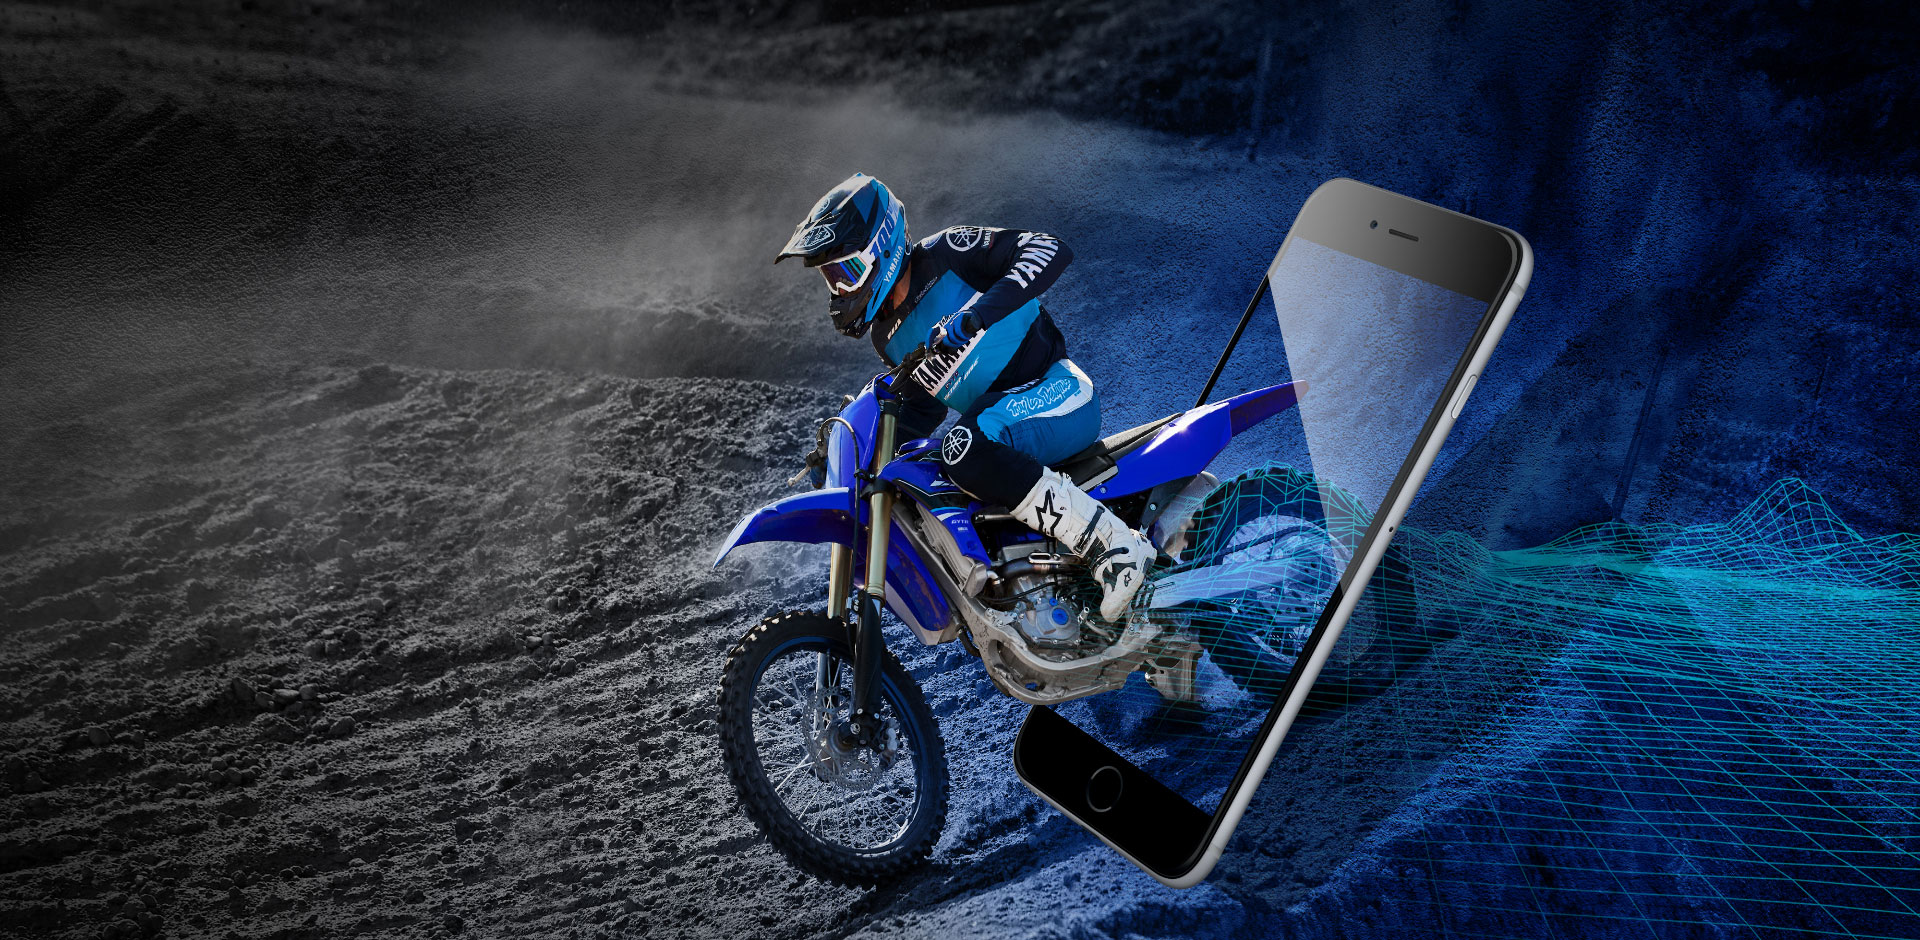 ARE YOU GETTING THE MOST OUT OF YOUR YZ?